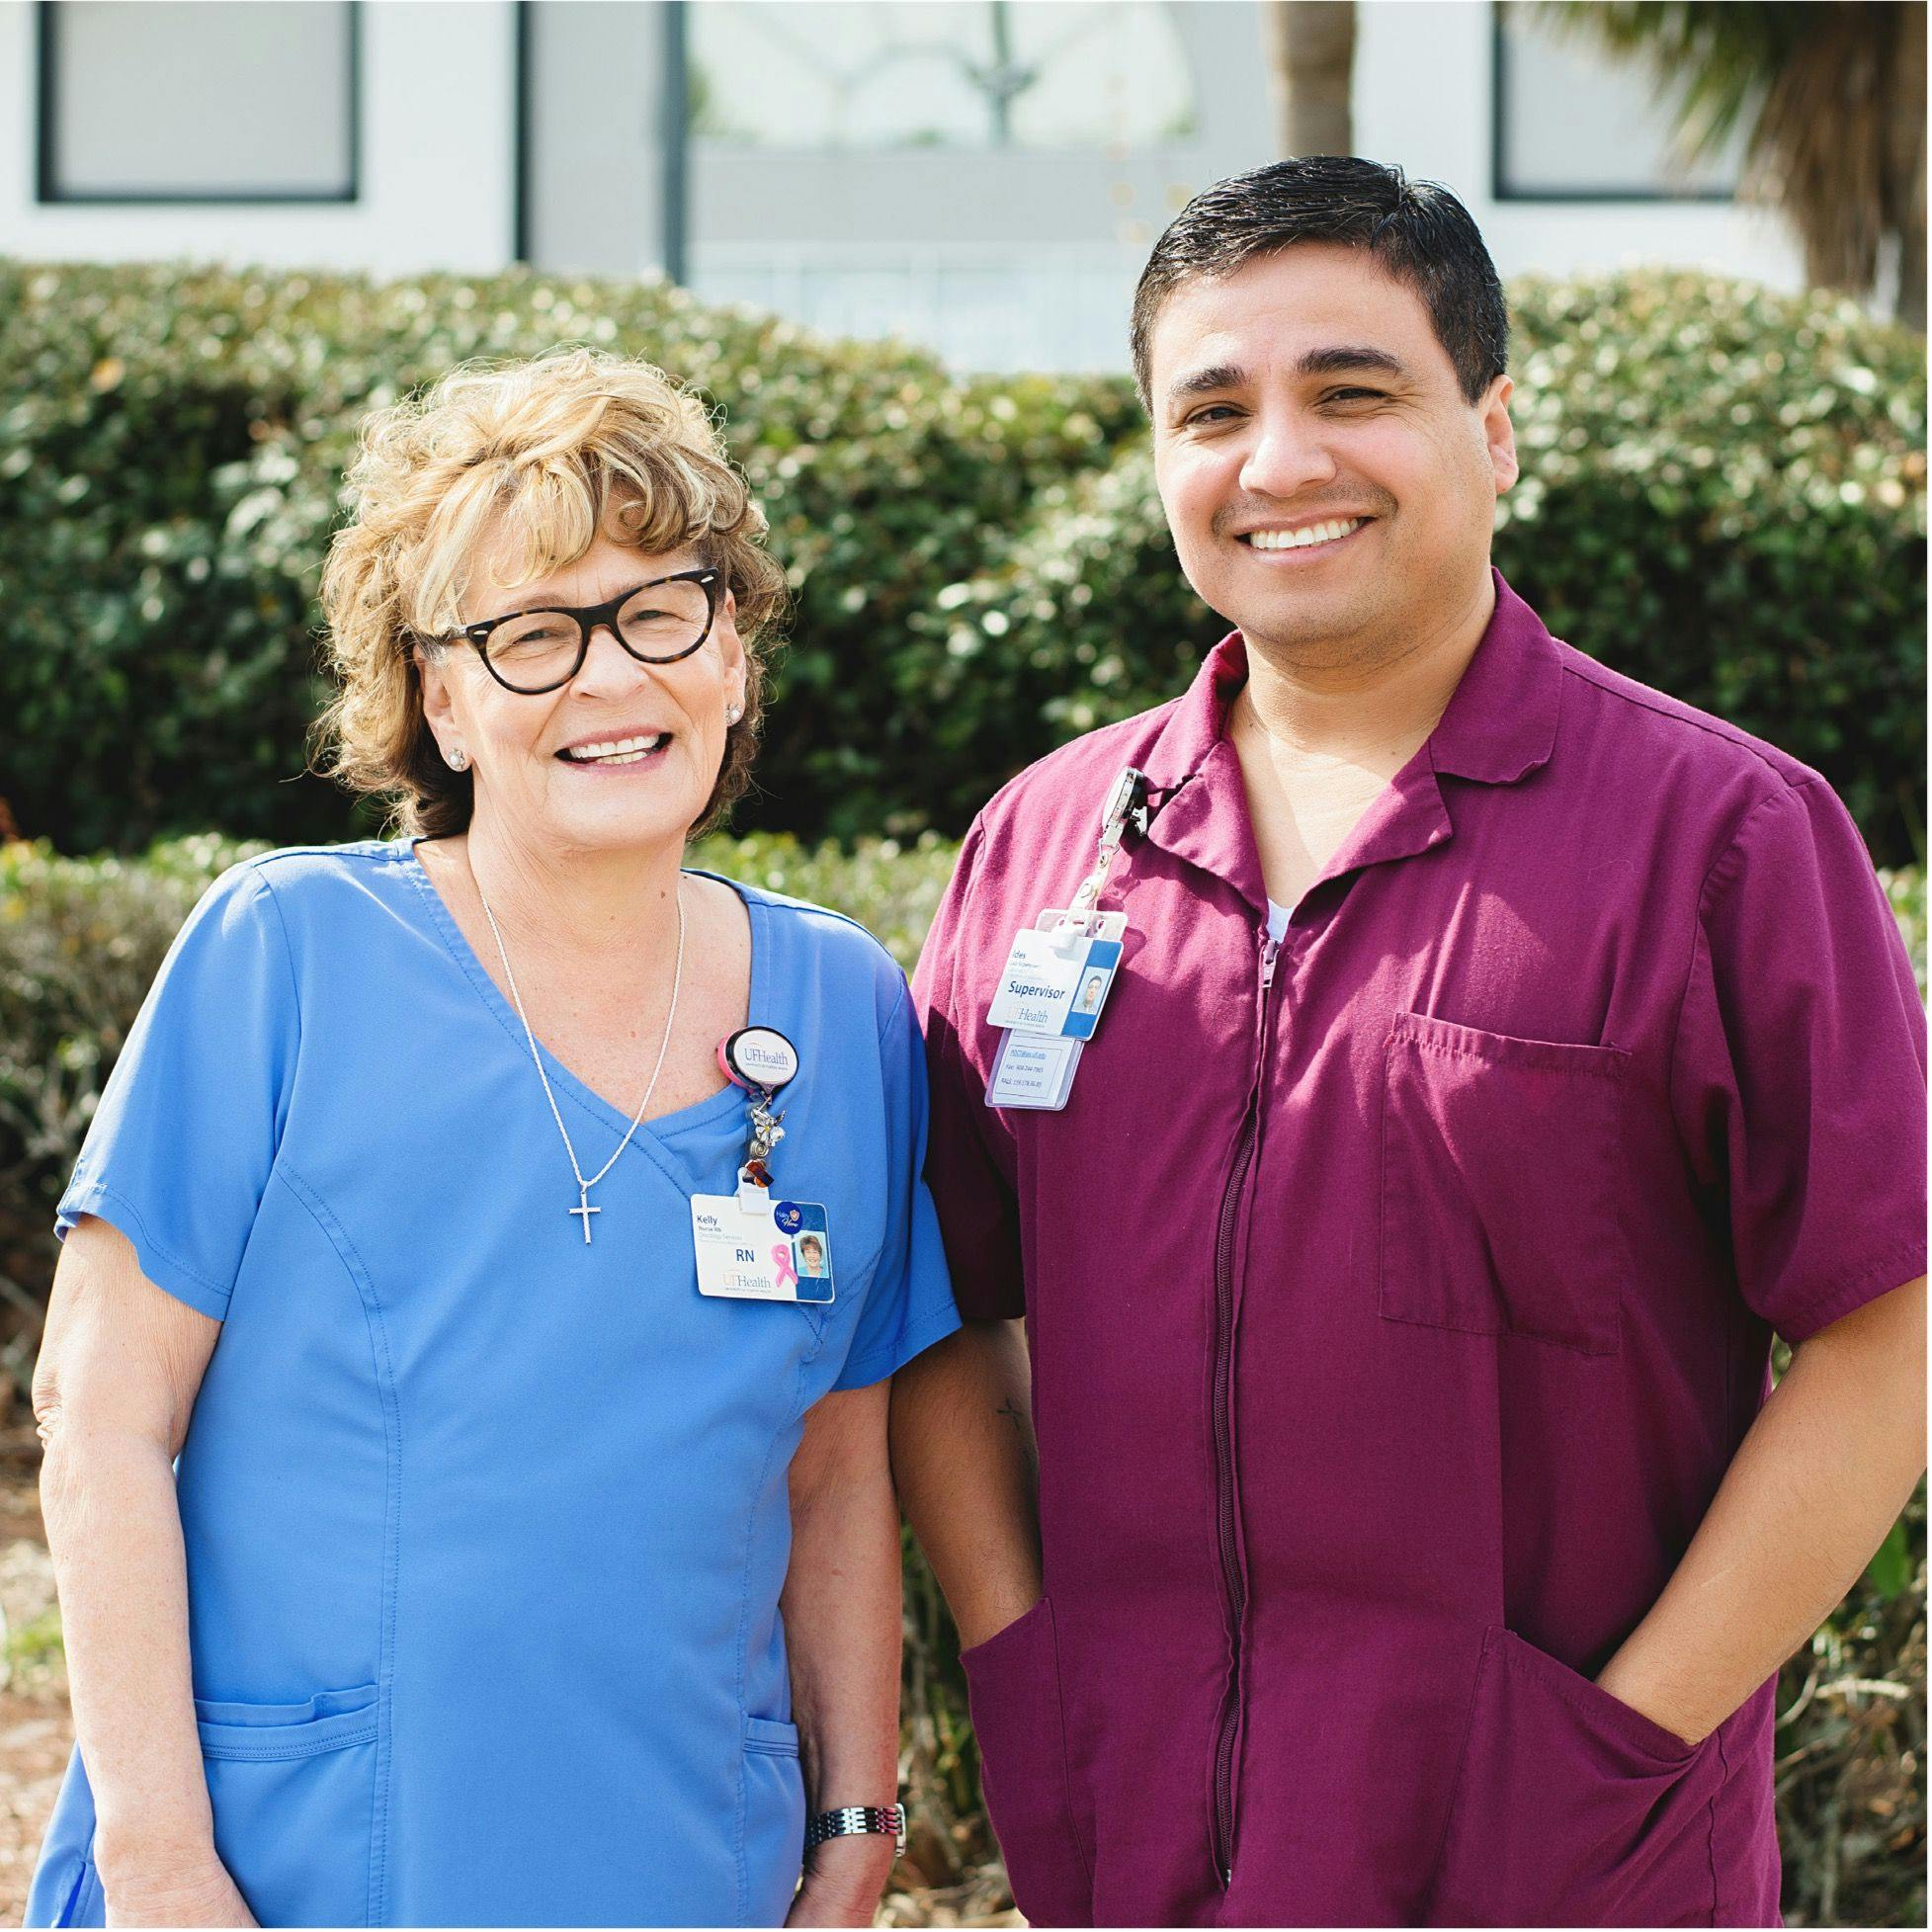 From left: Kelly Bryant, RN, a blonde nurse in blue scrubs with brown glasses and Ides Torres, MLS (ASCP), a Latino man in a maroon scrub top. both are looking at and smiling at the camera  Photos by Marina Kishnir